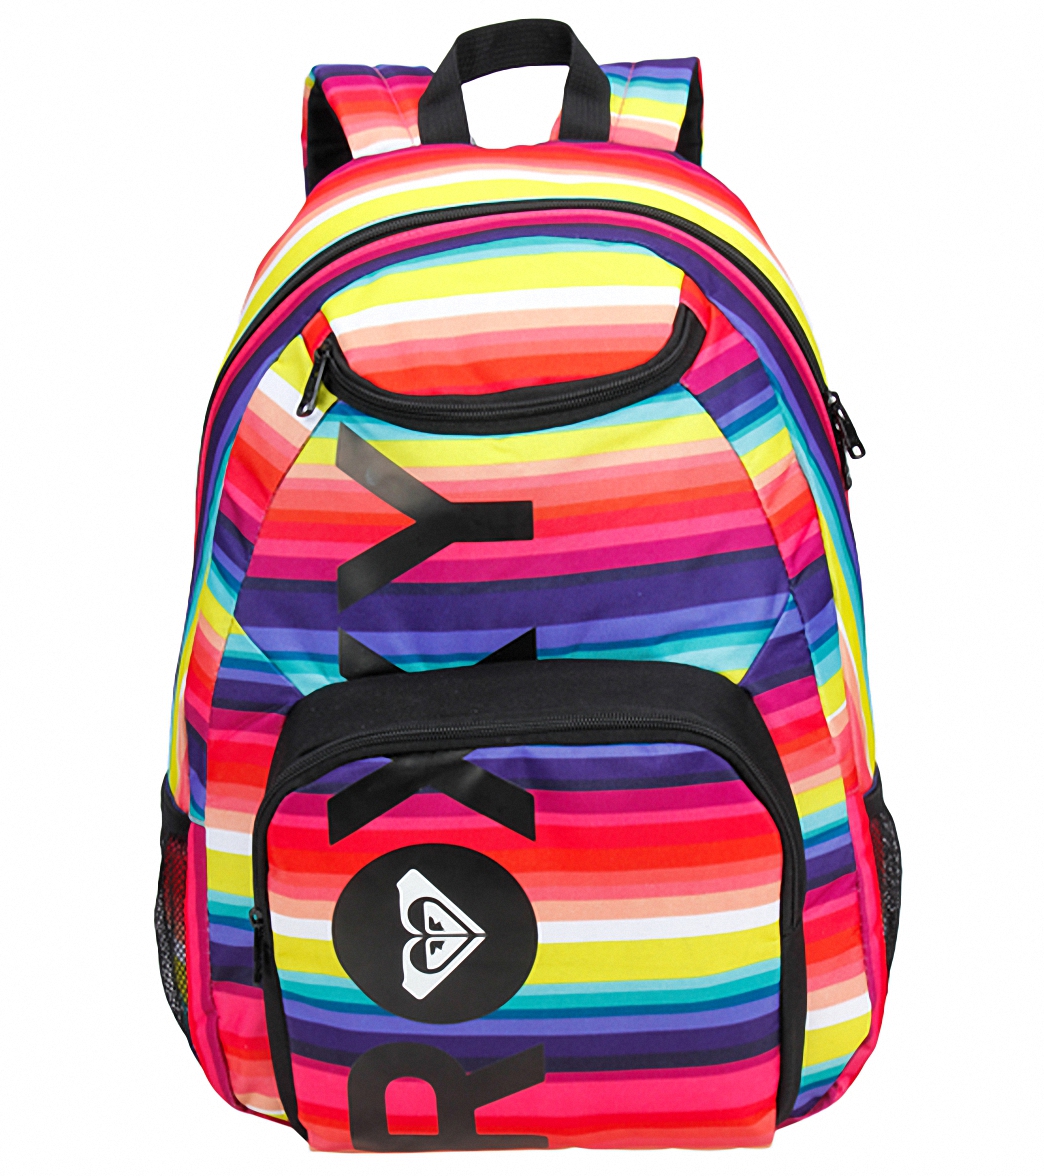 Top 10 Desirable Backpacks Designs For Kids